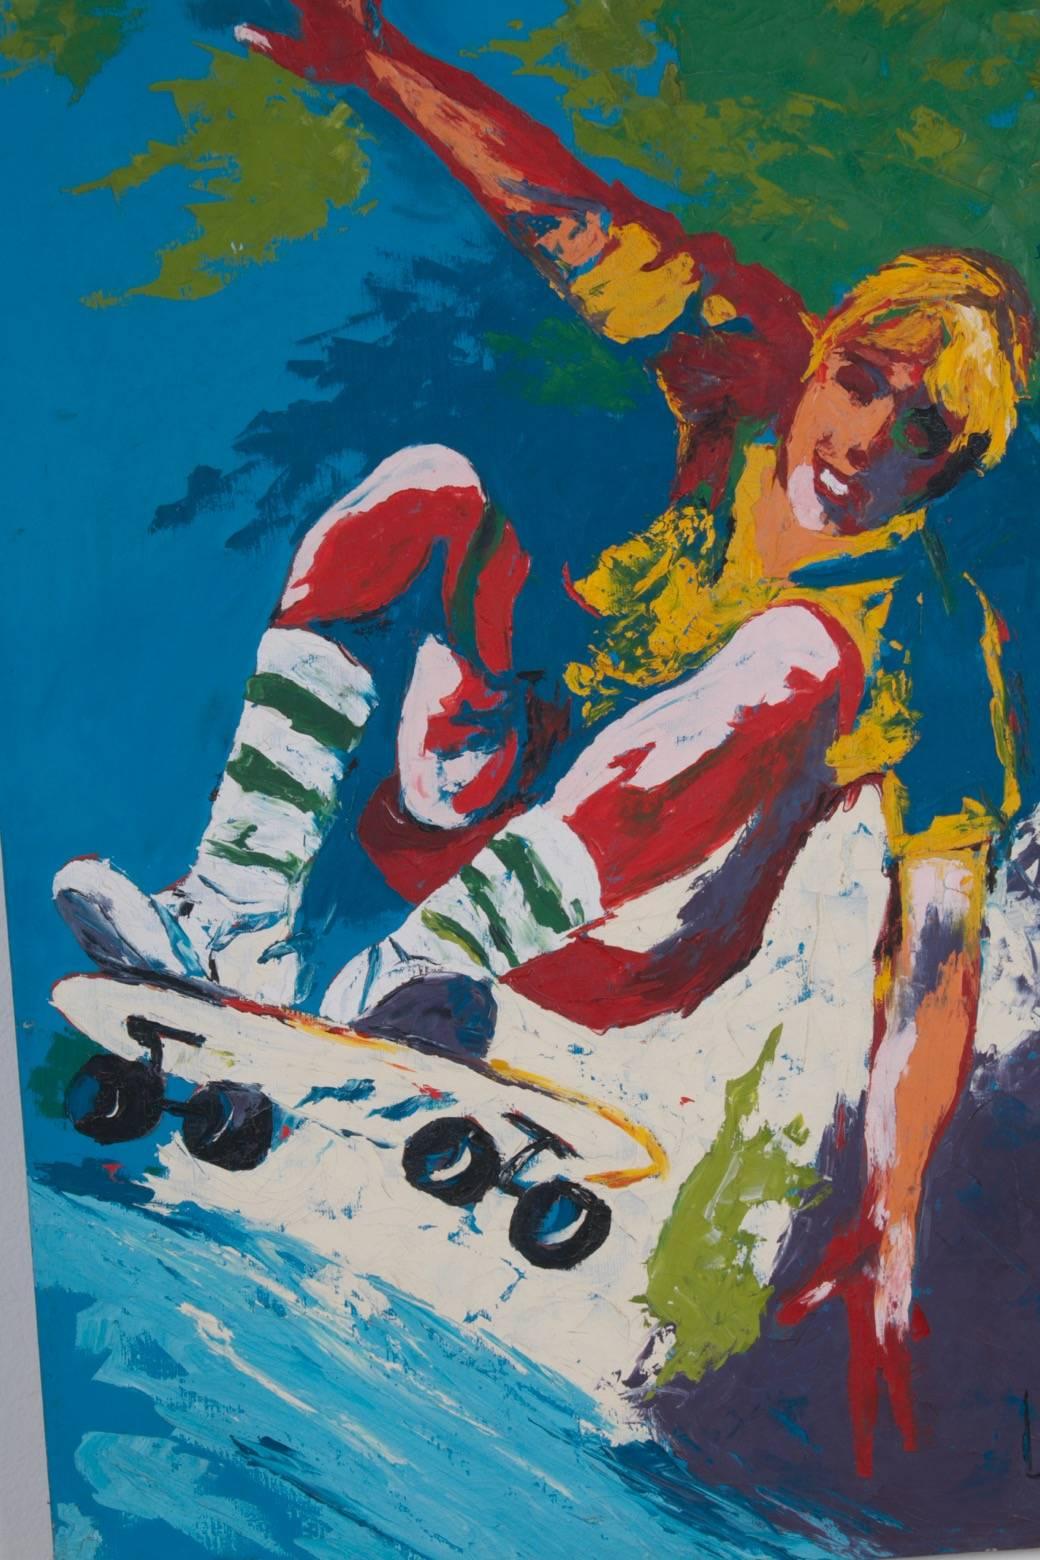 Dogtown era California skateboarder oil painting, Lipsett, 1978.
This vibrant abstract painting on canvas measures 40" high x 30" wide x 2" deep. Primary colors burst off the canvas and the energy of skateboard motion exudes from the